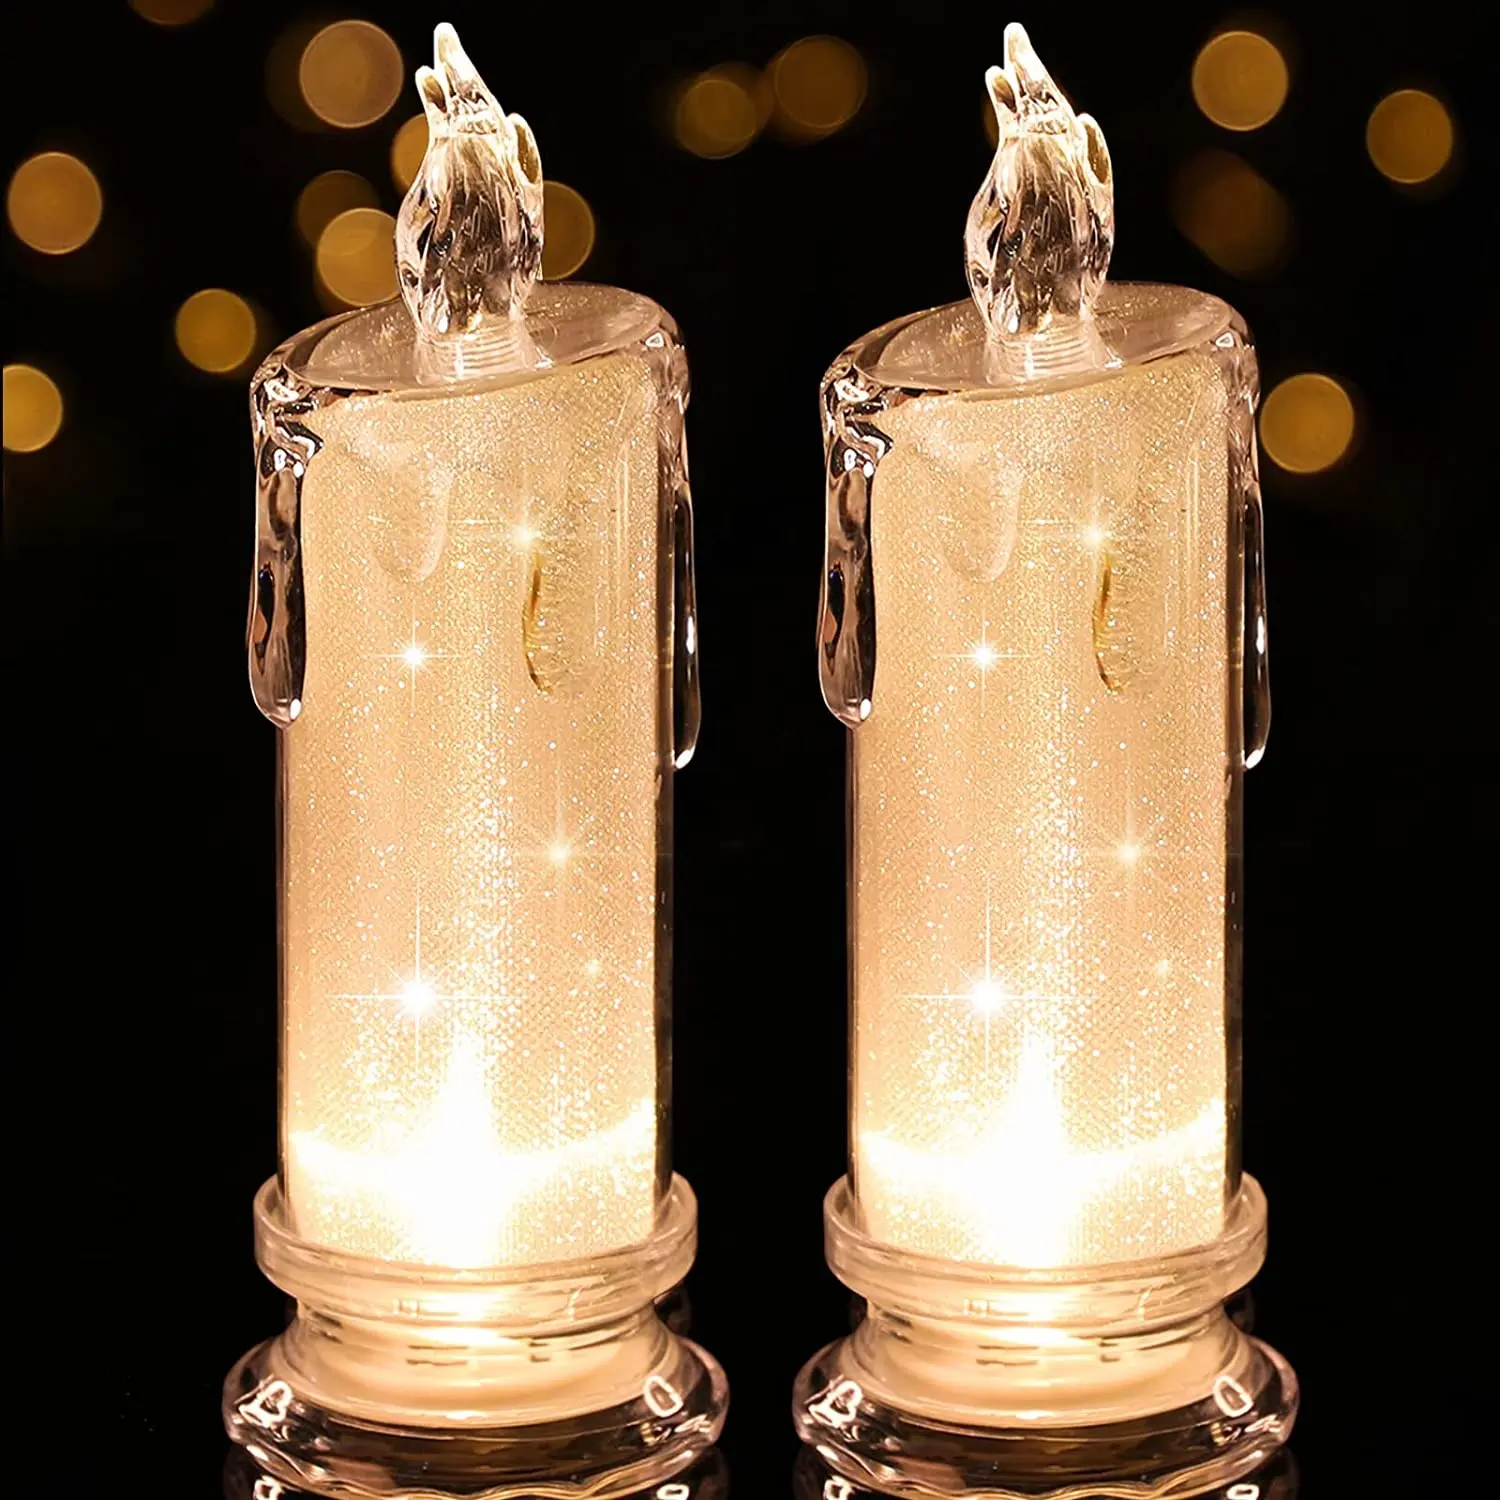 Wholesale Prayer Acrylic Led Candle 3d Flameless Wick Battery Operated Led Candle Light For Party Wedding House